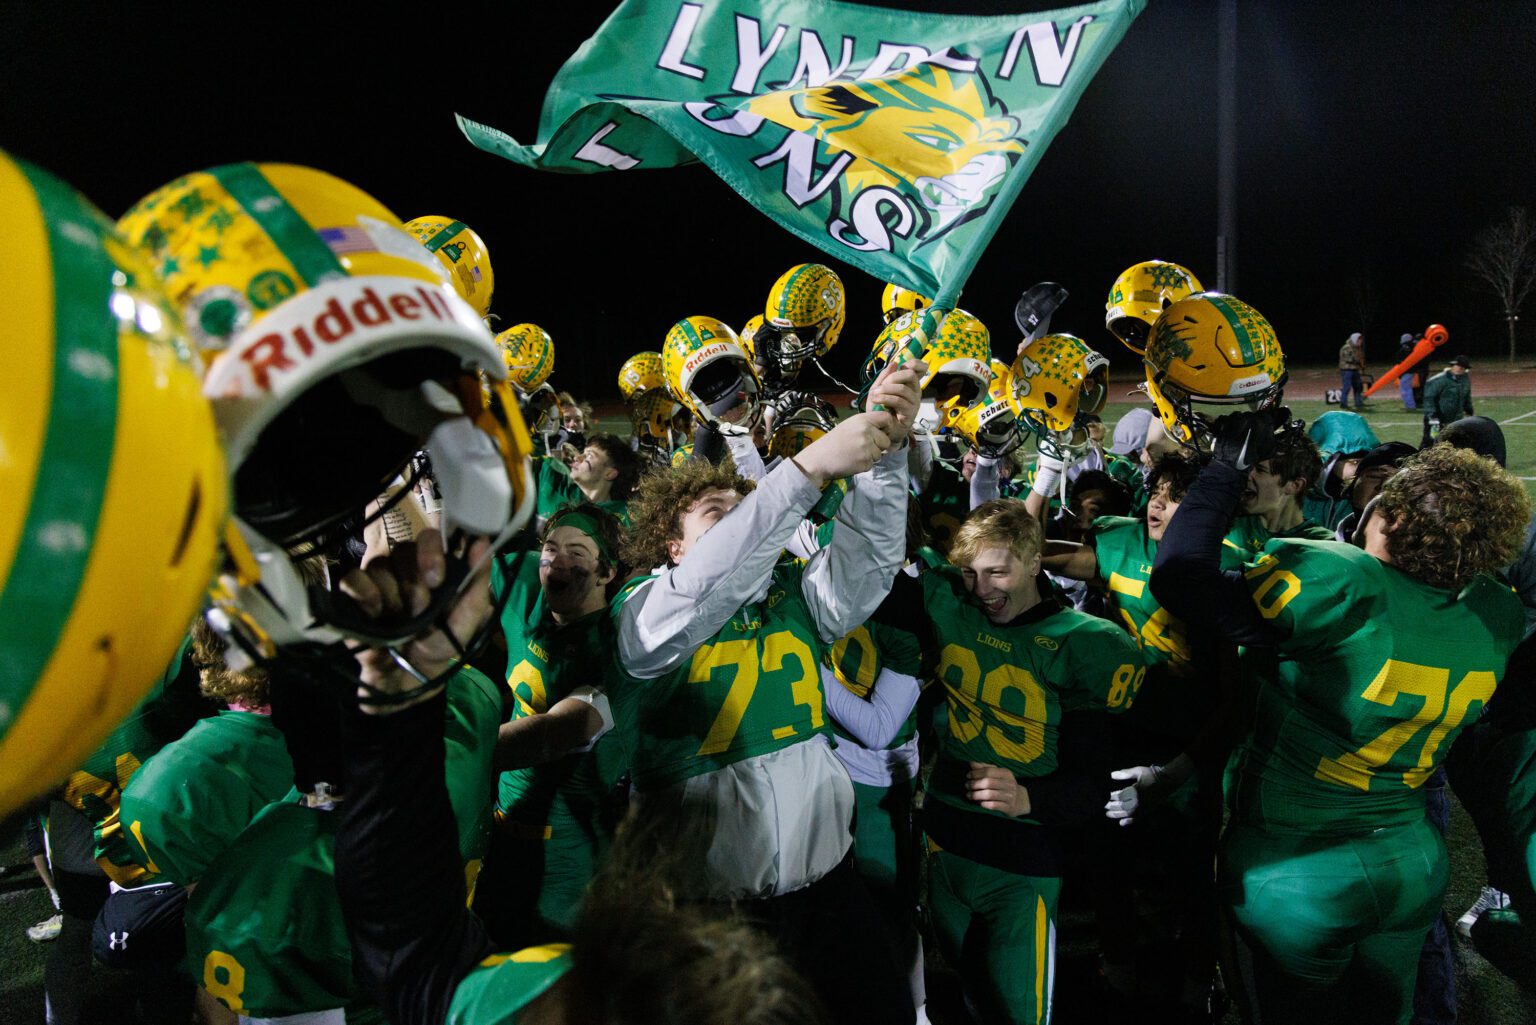 Lynden players celebrate after beating Enumclaw 41-14 in a state semifinal game on Nov. 26. The Lions advanced to the 2A state championship on Dec. 3.